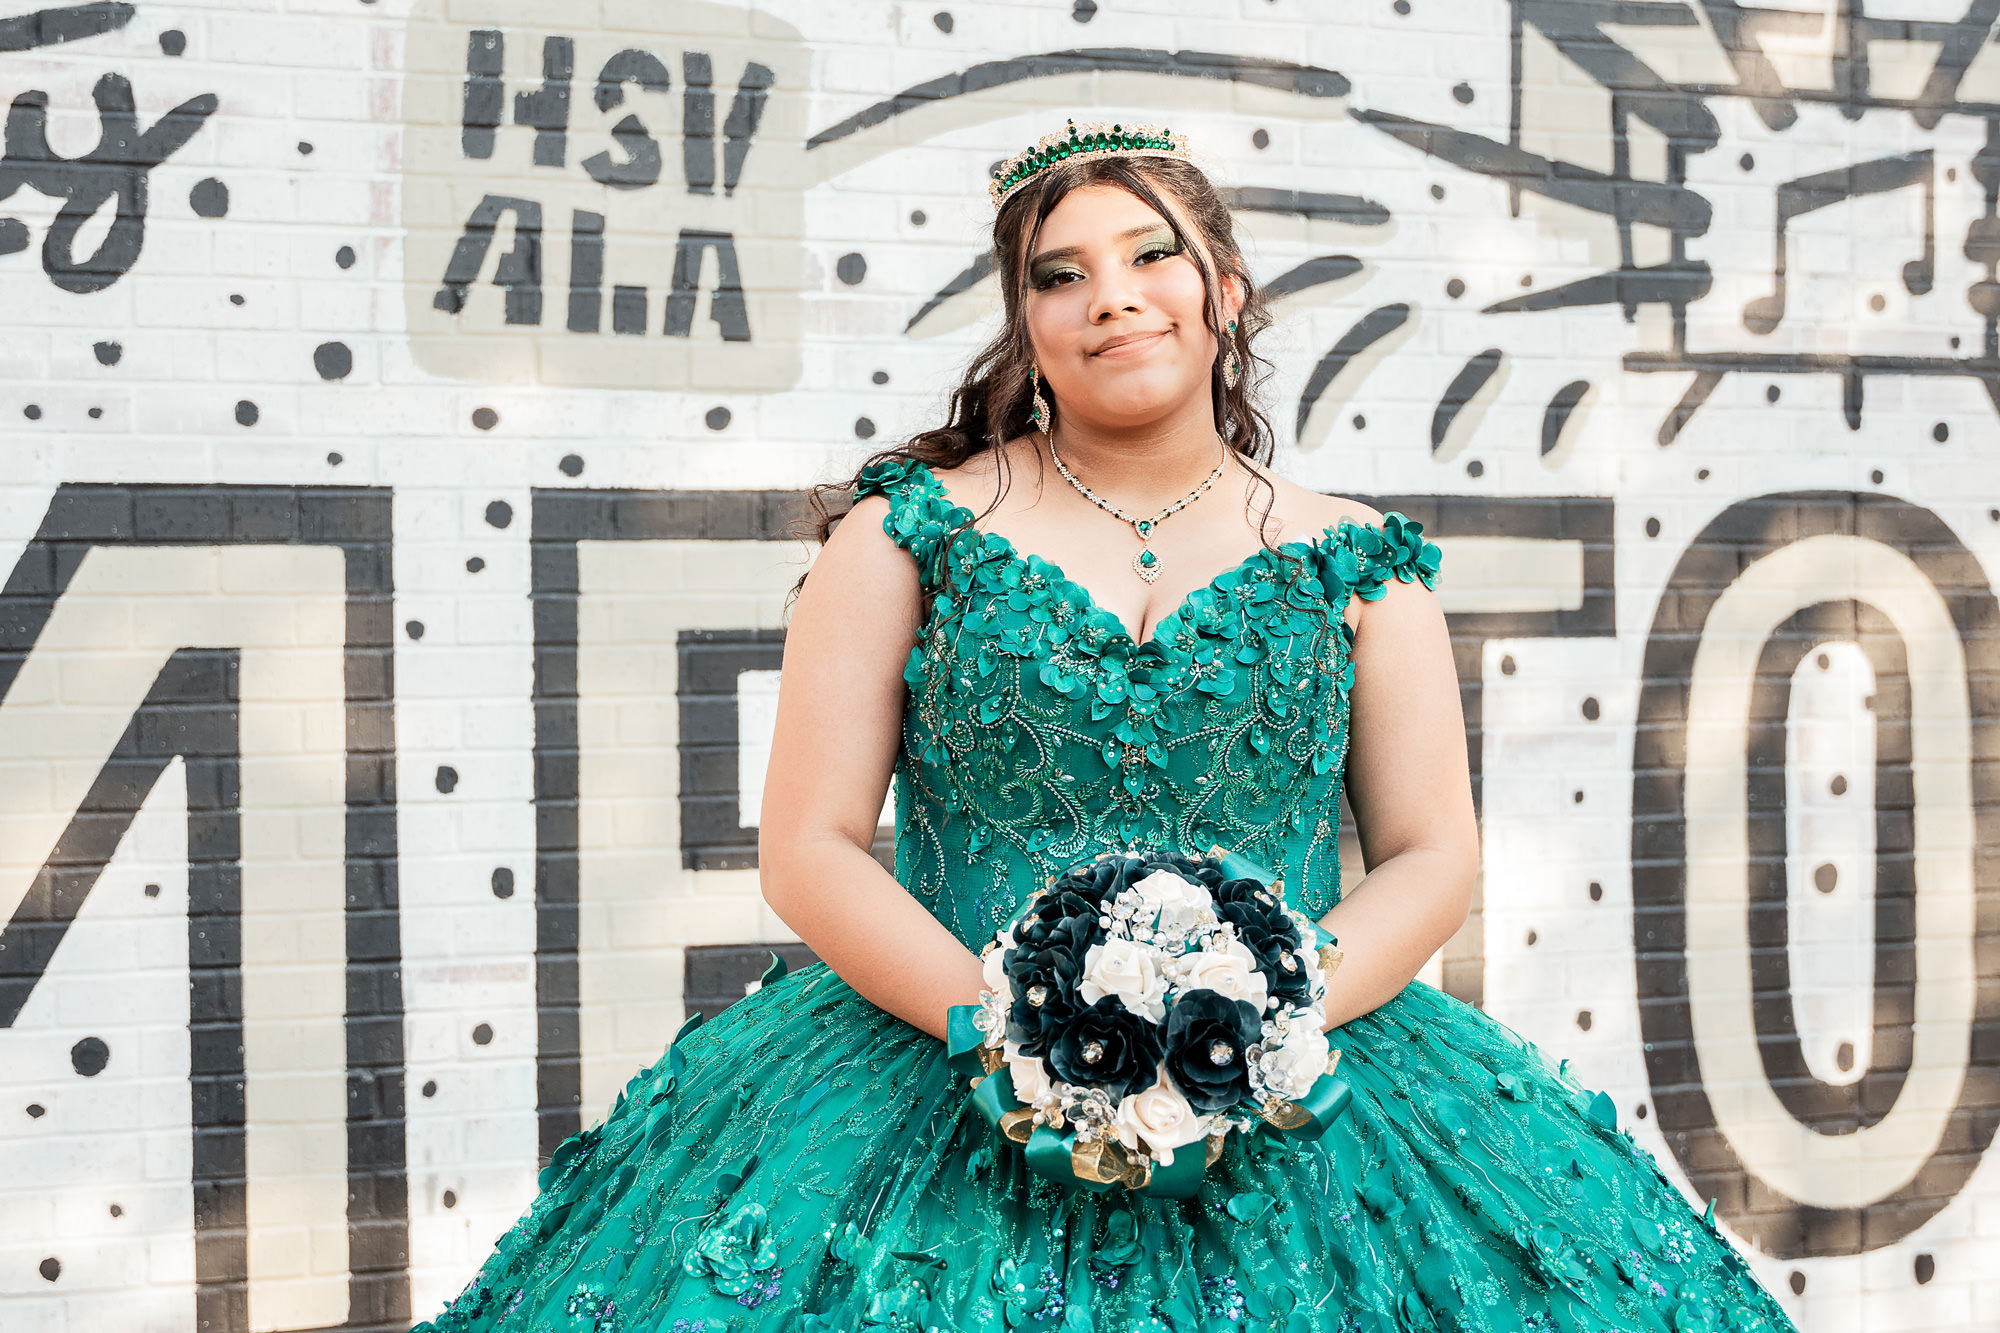 Madison AL Event Photographer, Andrea Angles Photography. Quinceanera posing for a photoshoot at Big Spring Park Alabama wearing a green dress